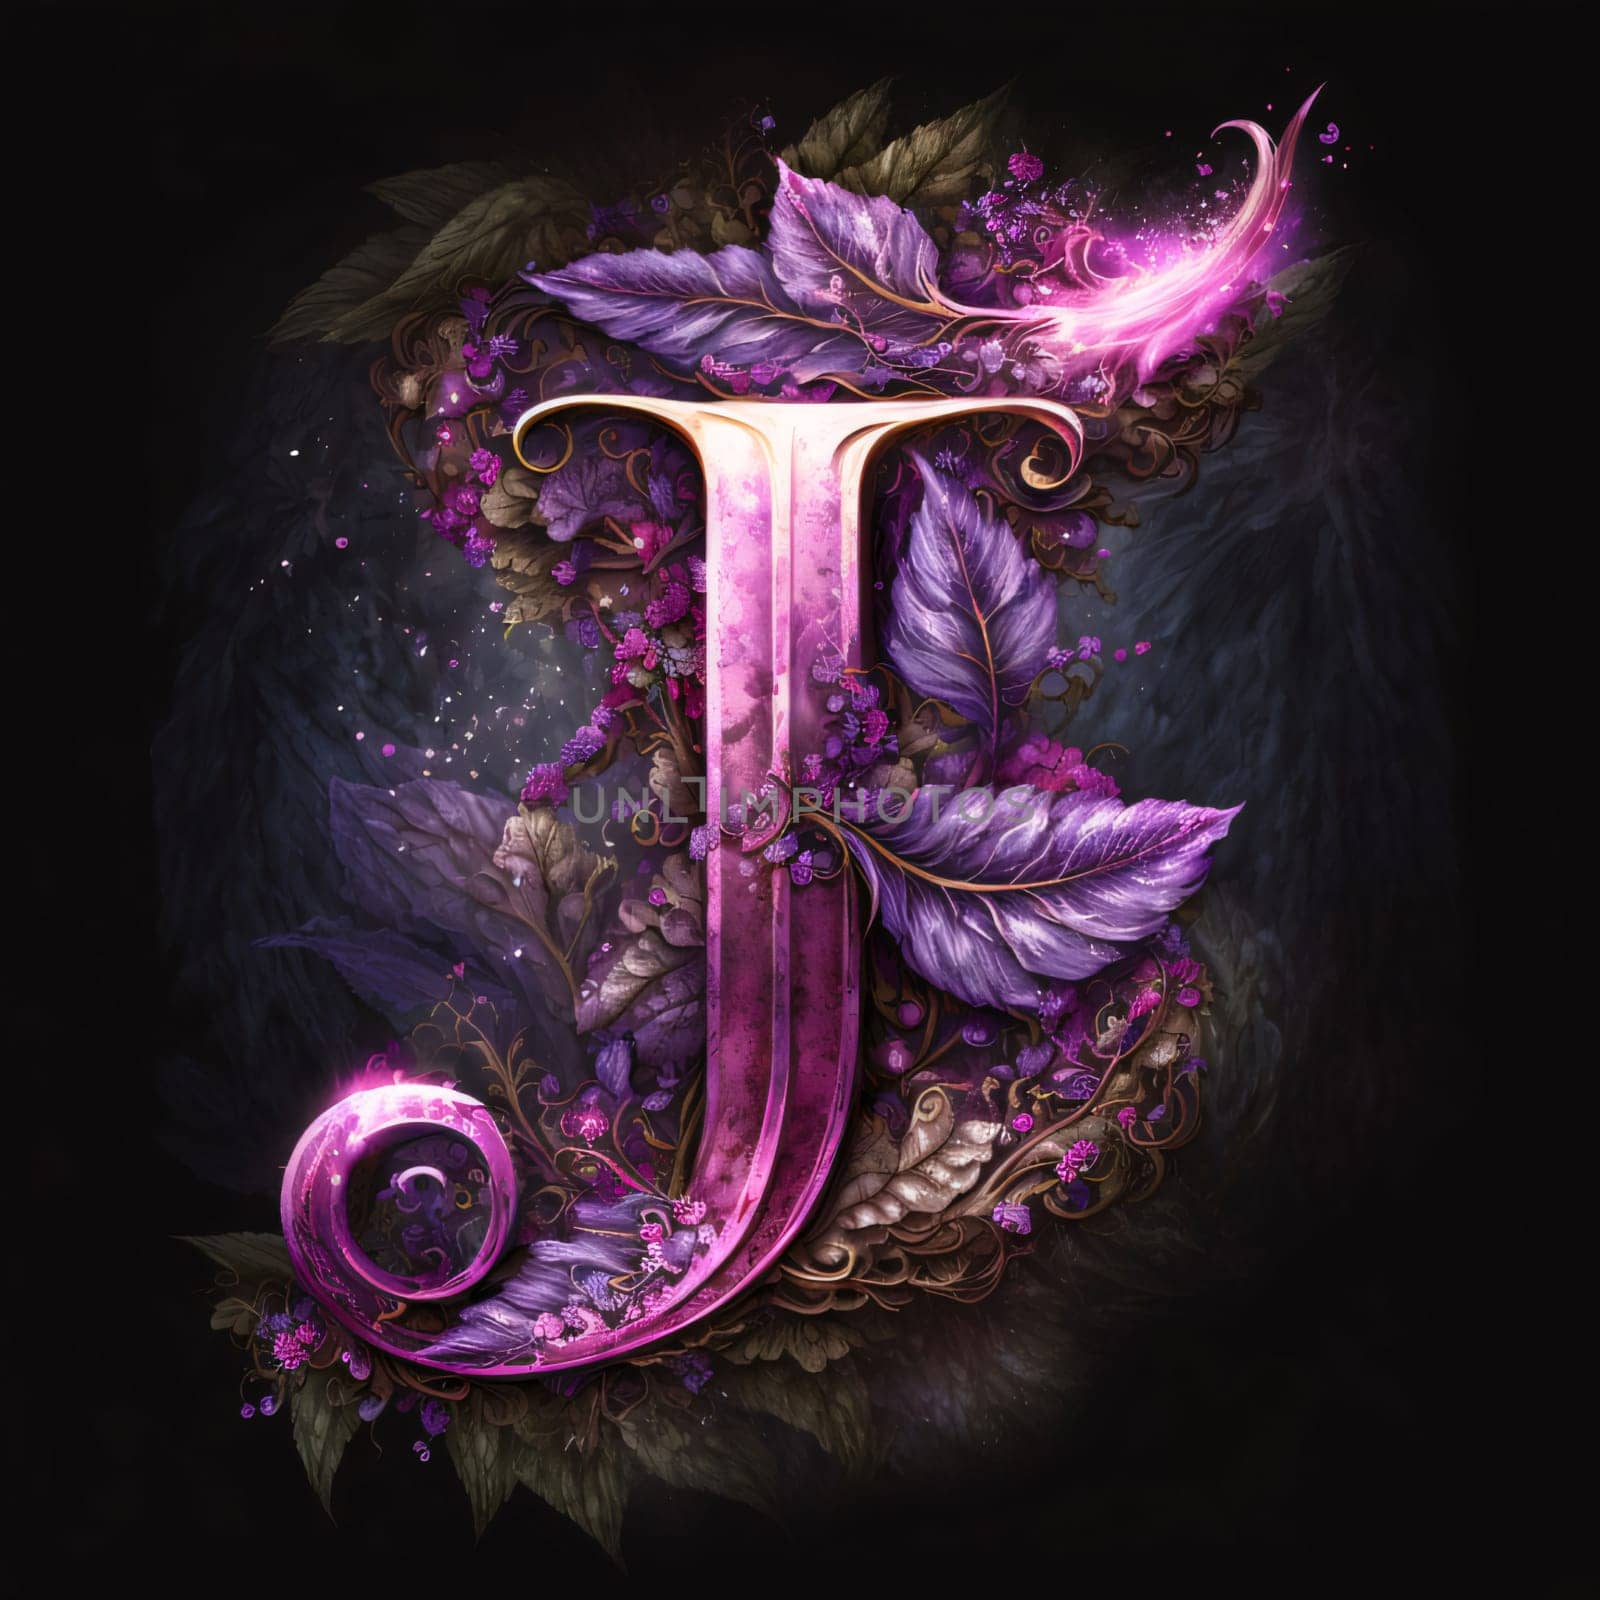 Graphic alphabet letters: Beautiful letter J with purple flowers and leaves on black background.